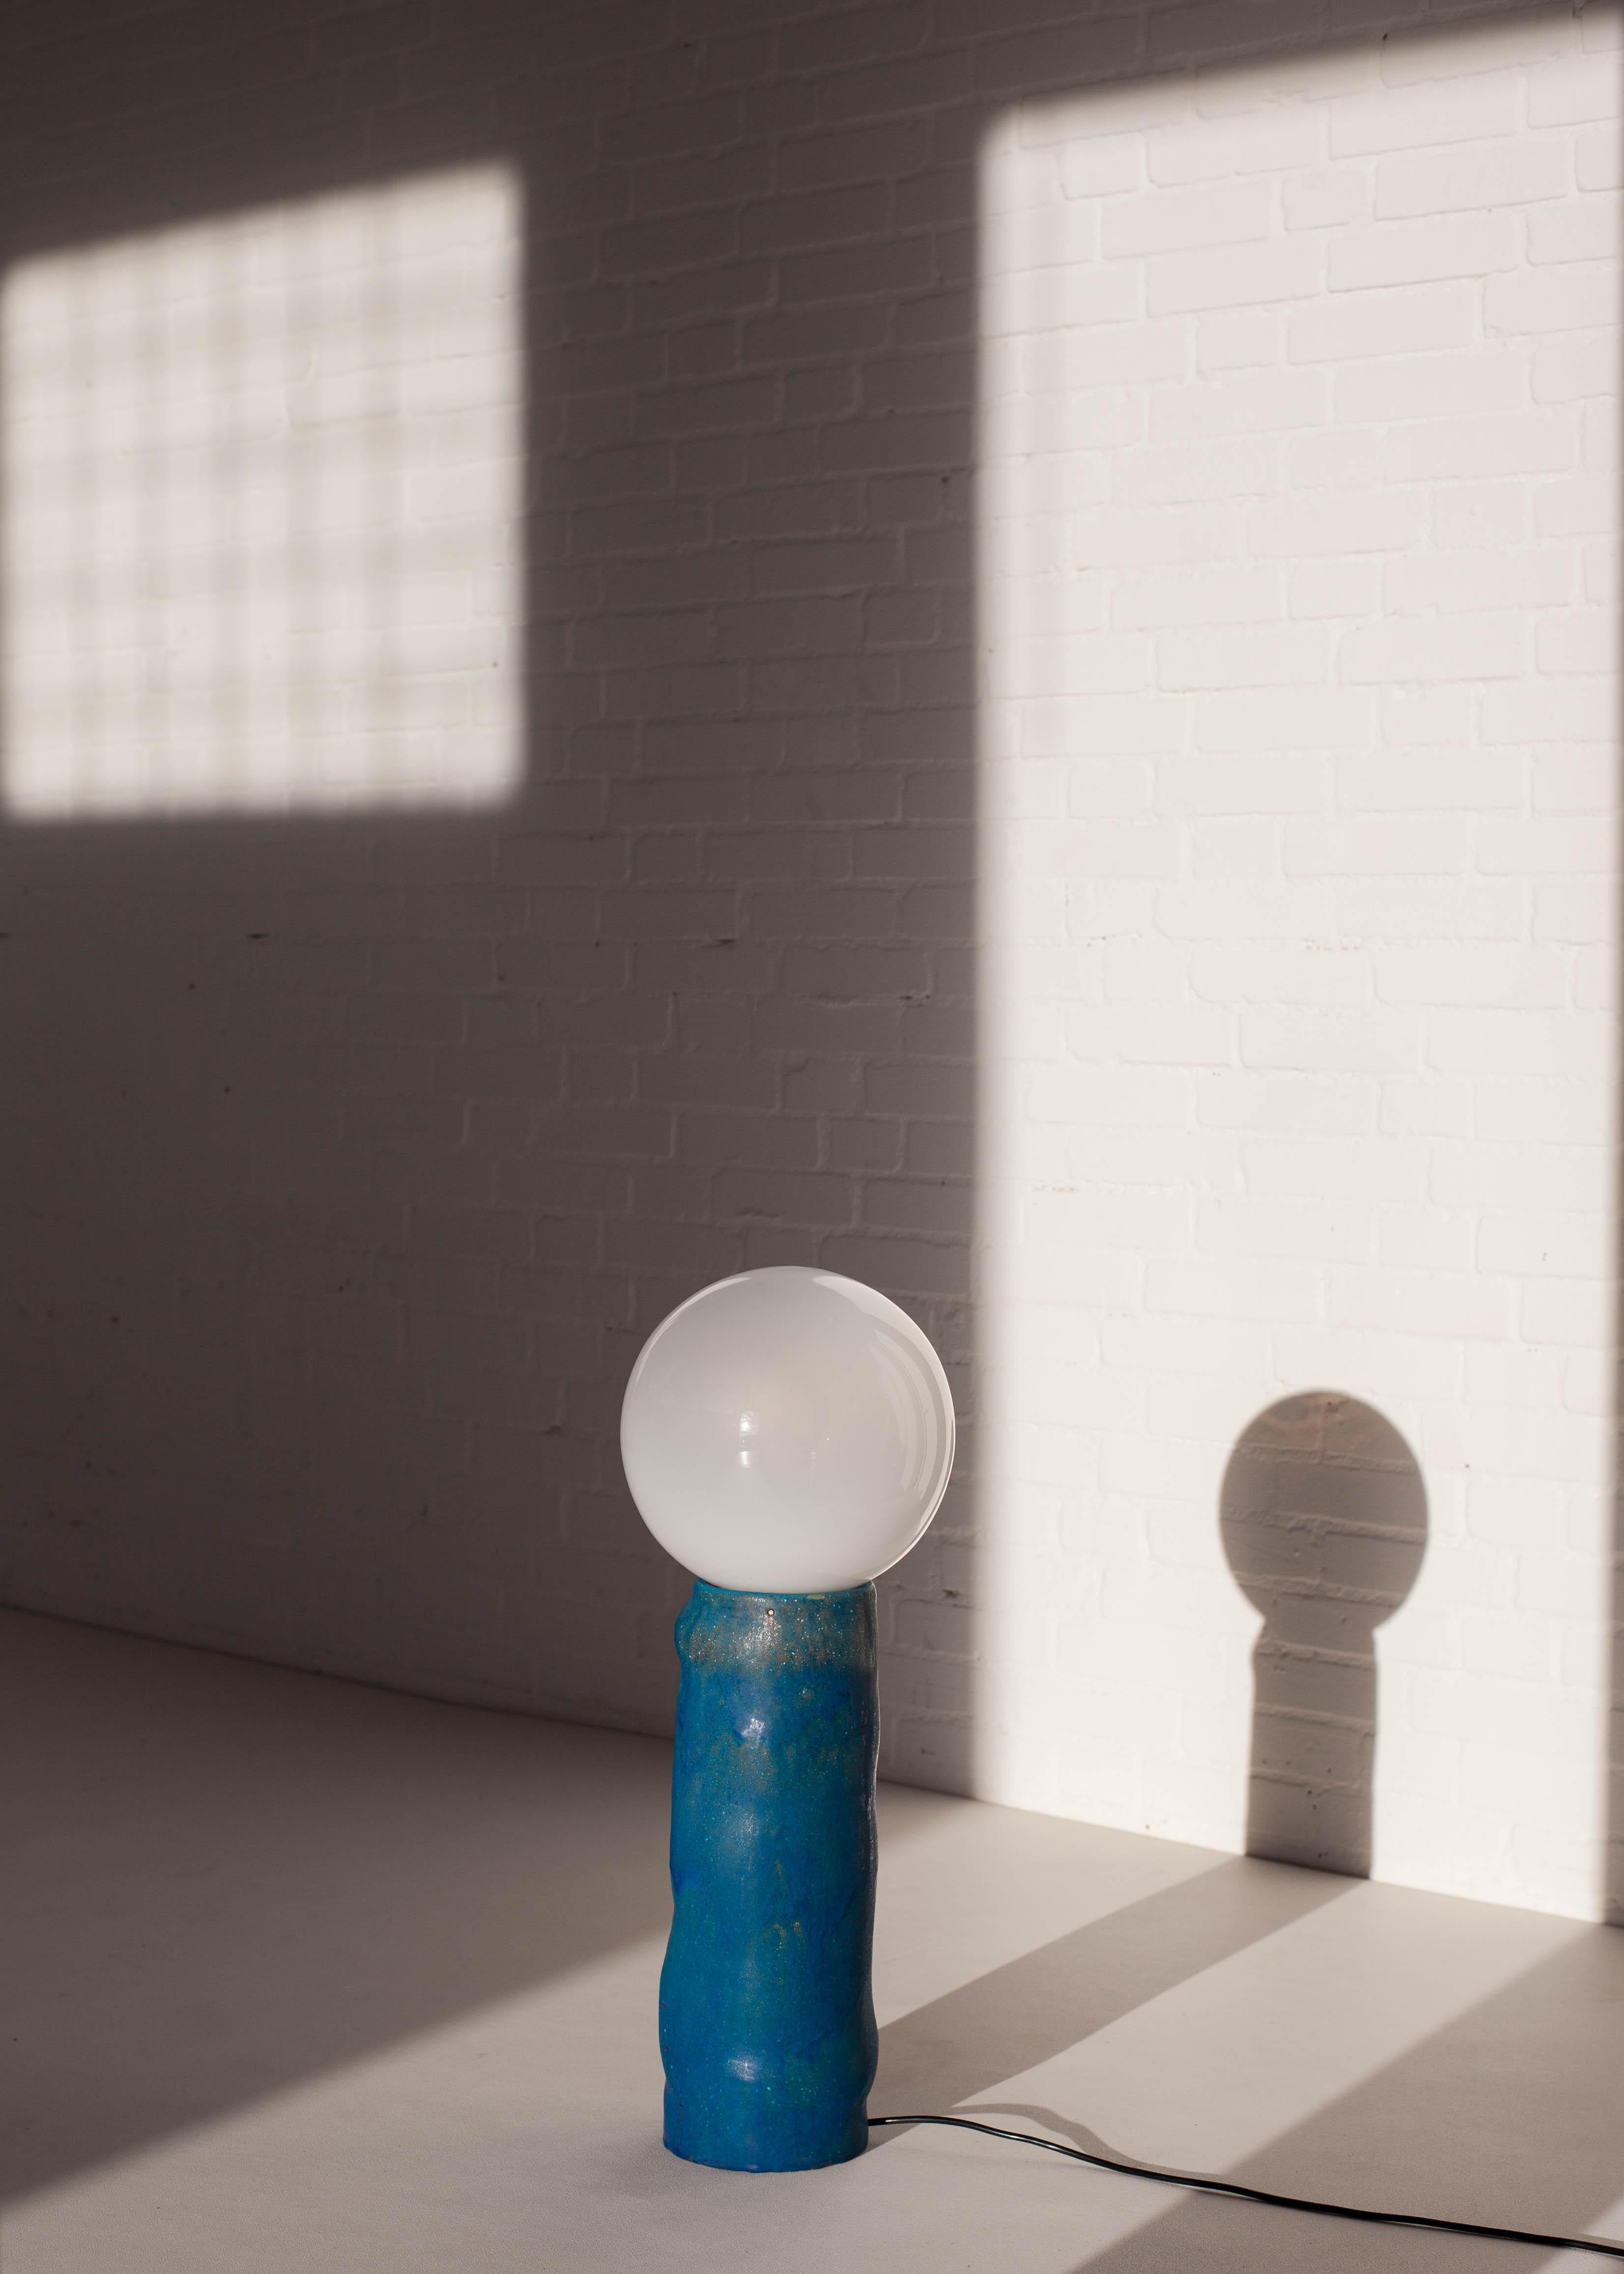 This floor lamp by the Dutch manufacturer RAAK is the odd one out among their designs produced in the 1970s. As opposed to the application of industrialised materials such as metals and plastics, this unique lamp features the use of blown glass and